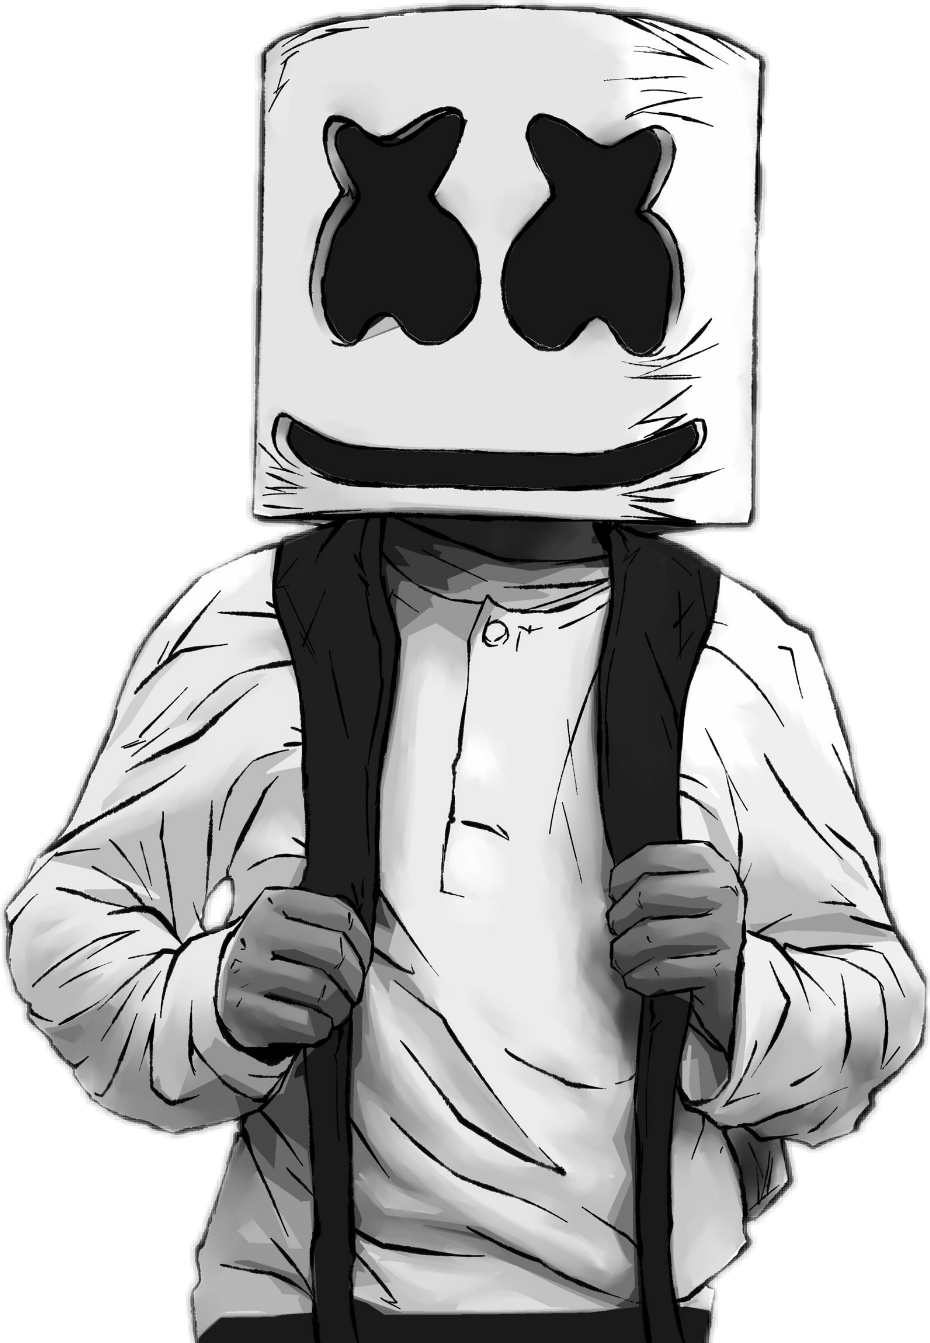 A Person Wearing A White Shirt With A Square Box On Their Head